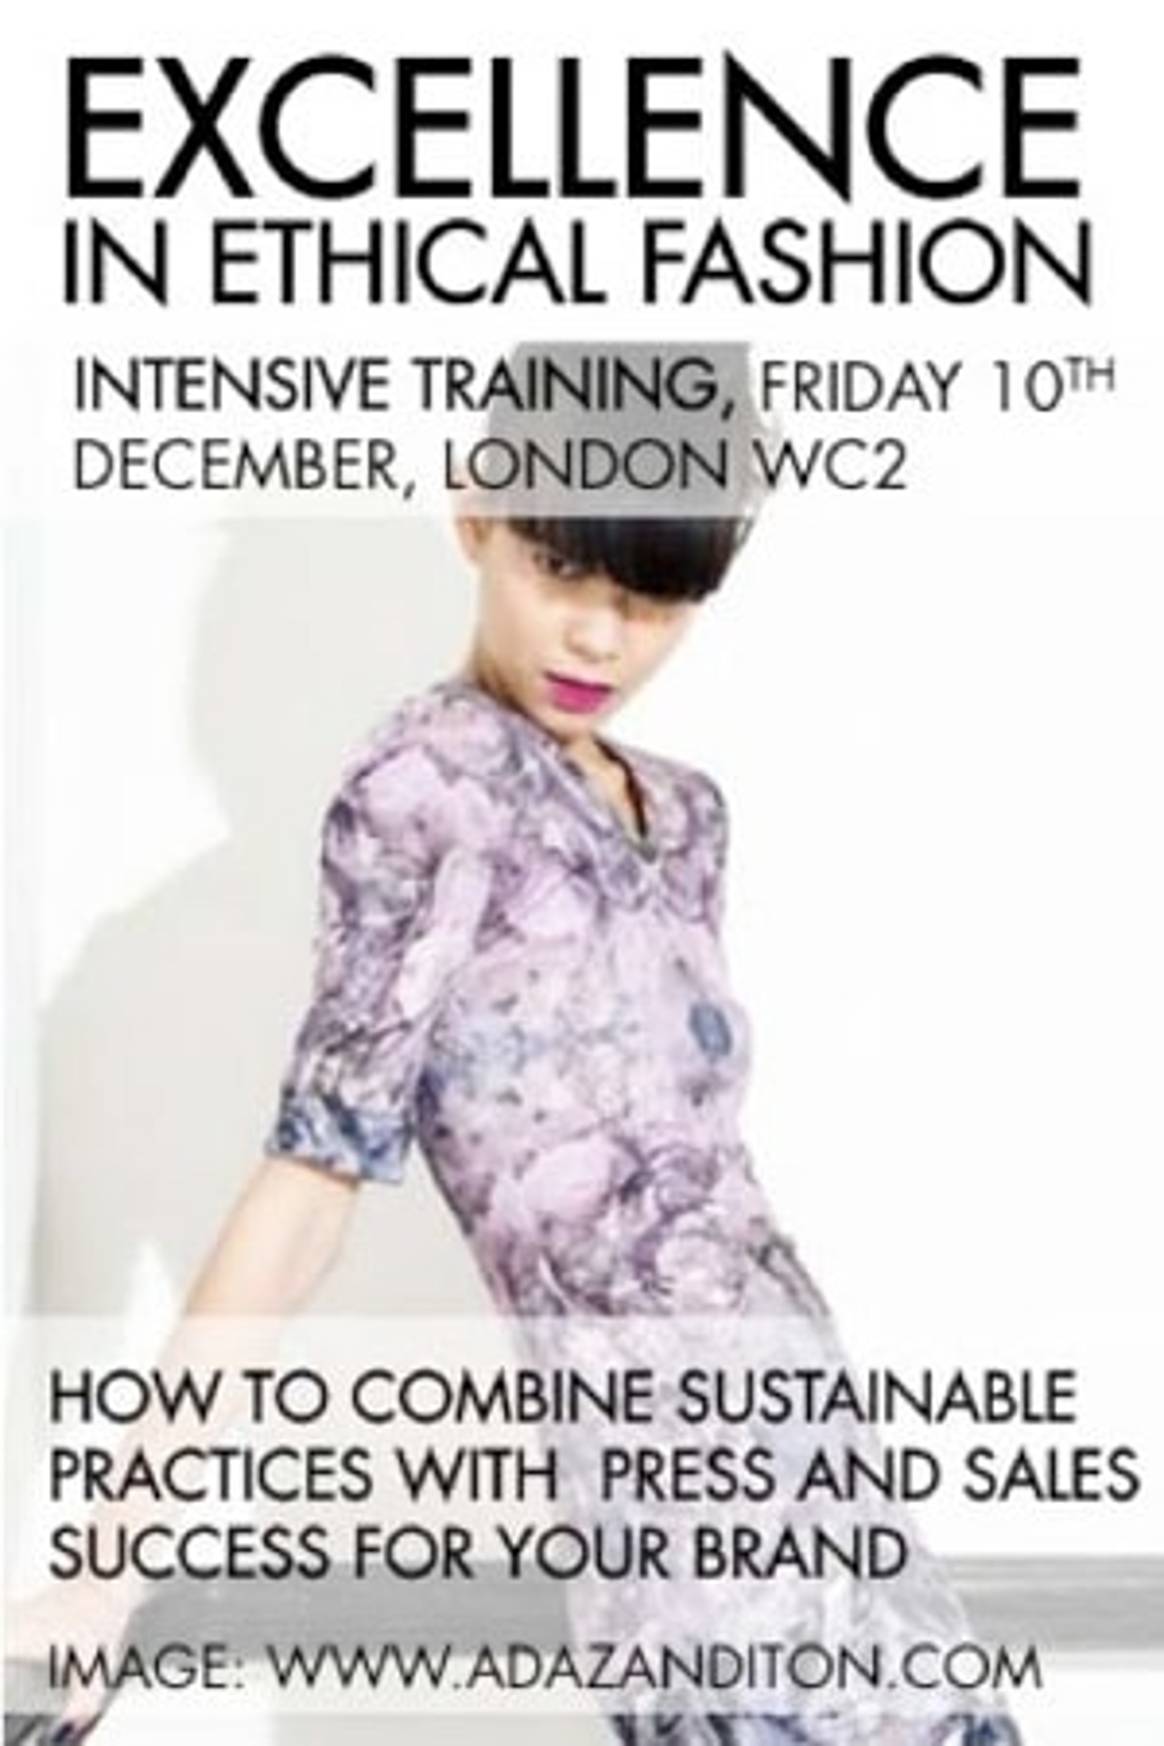 Excellence in ethical fashion - Excellence training day